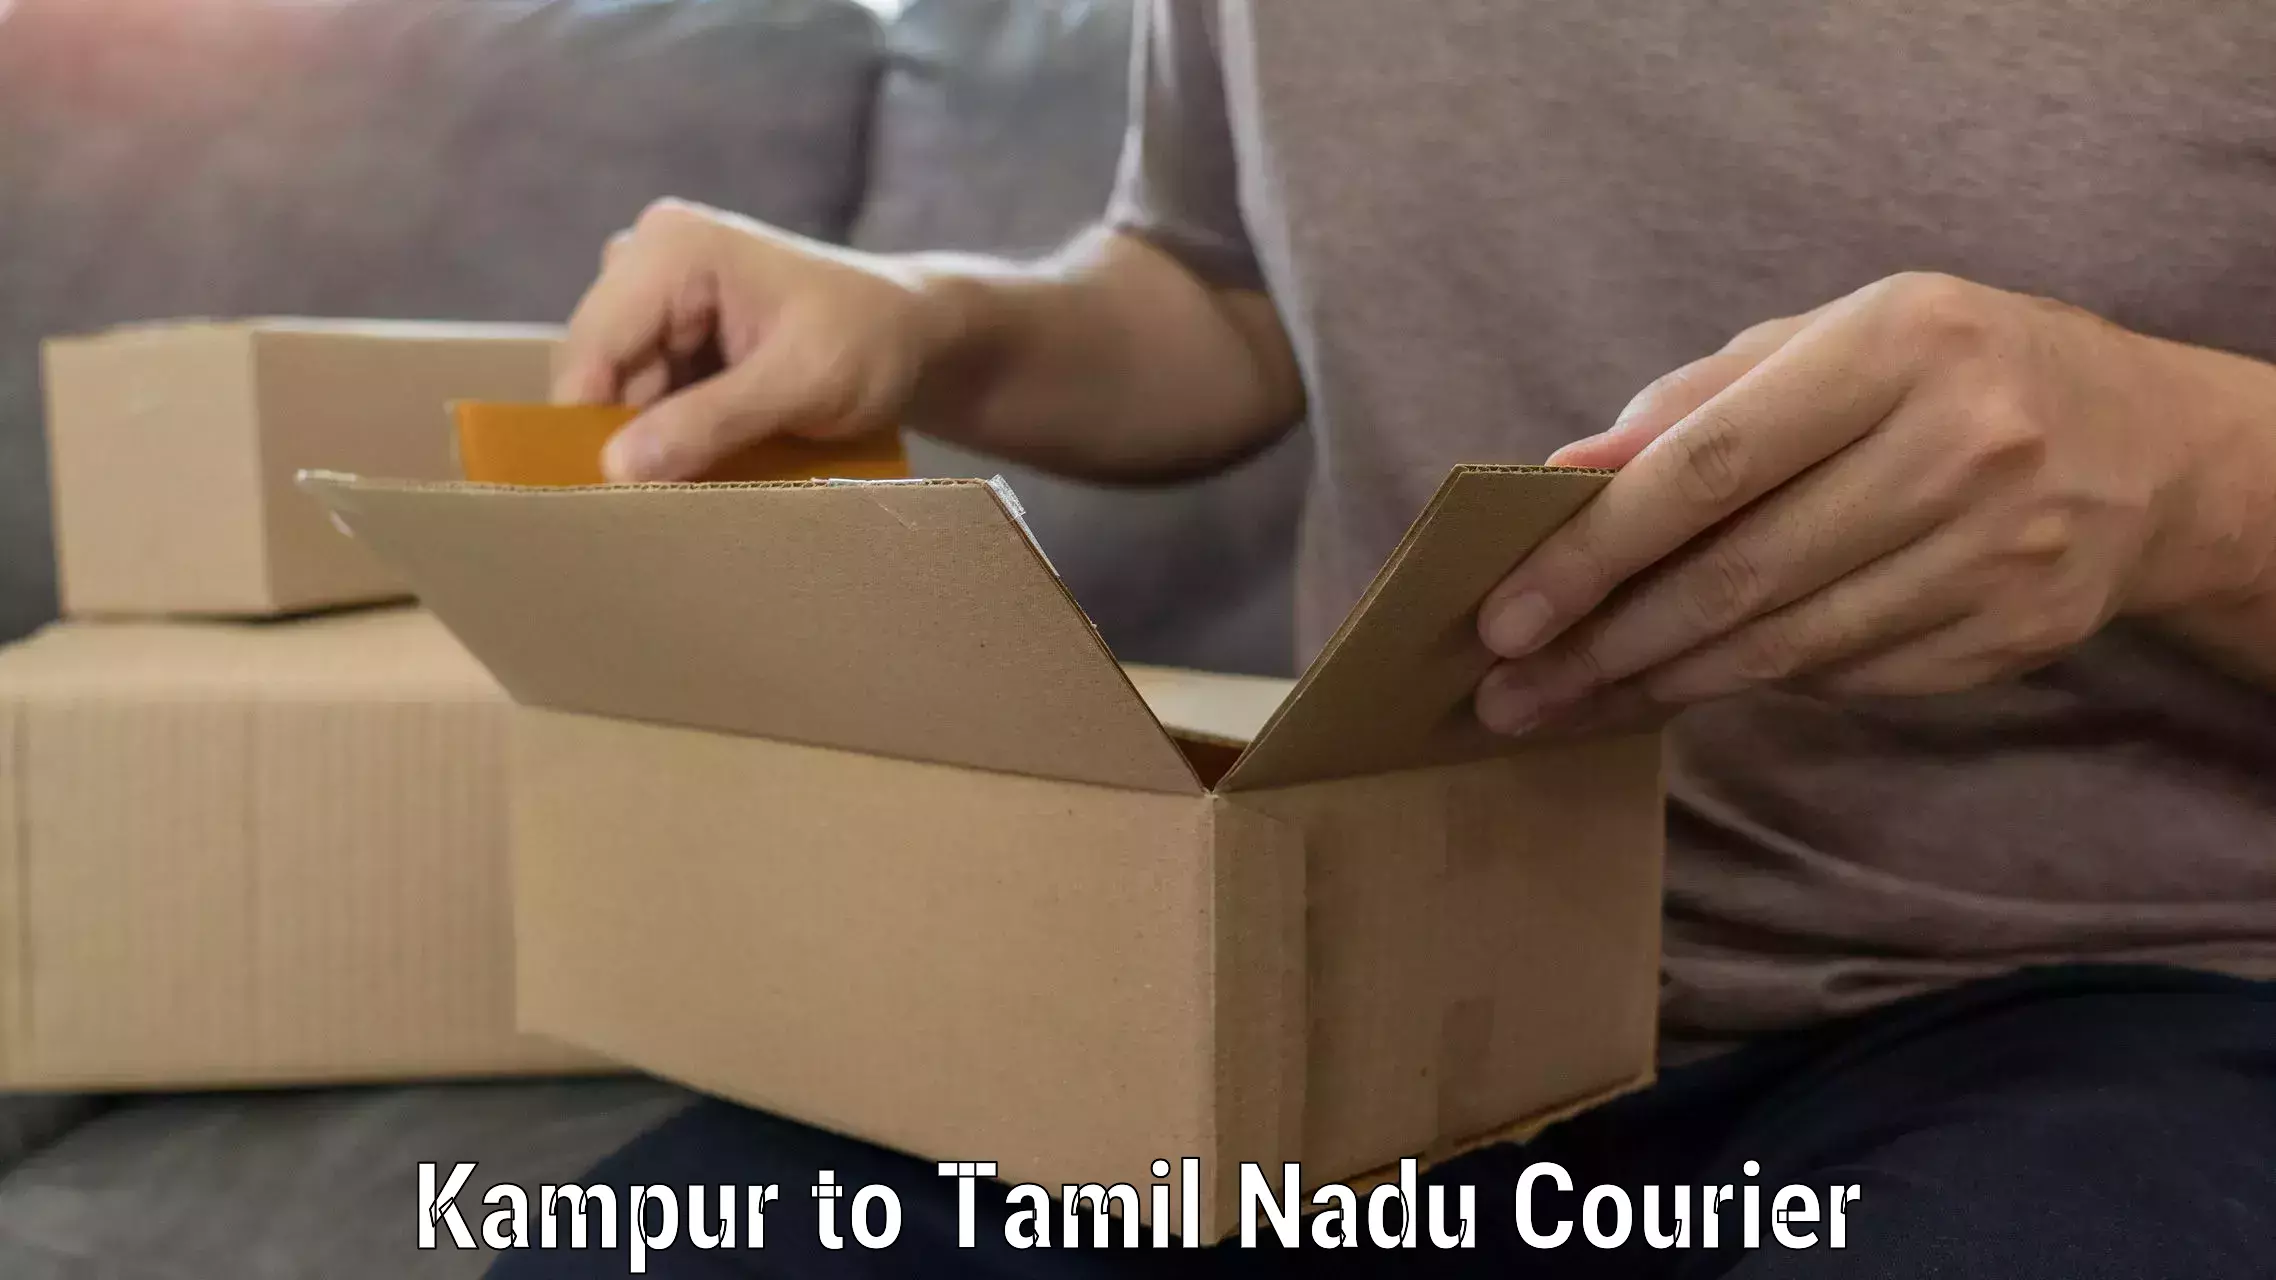 Furniture delivery service Kampur to Chennai Port